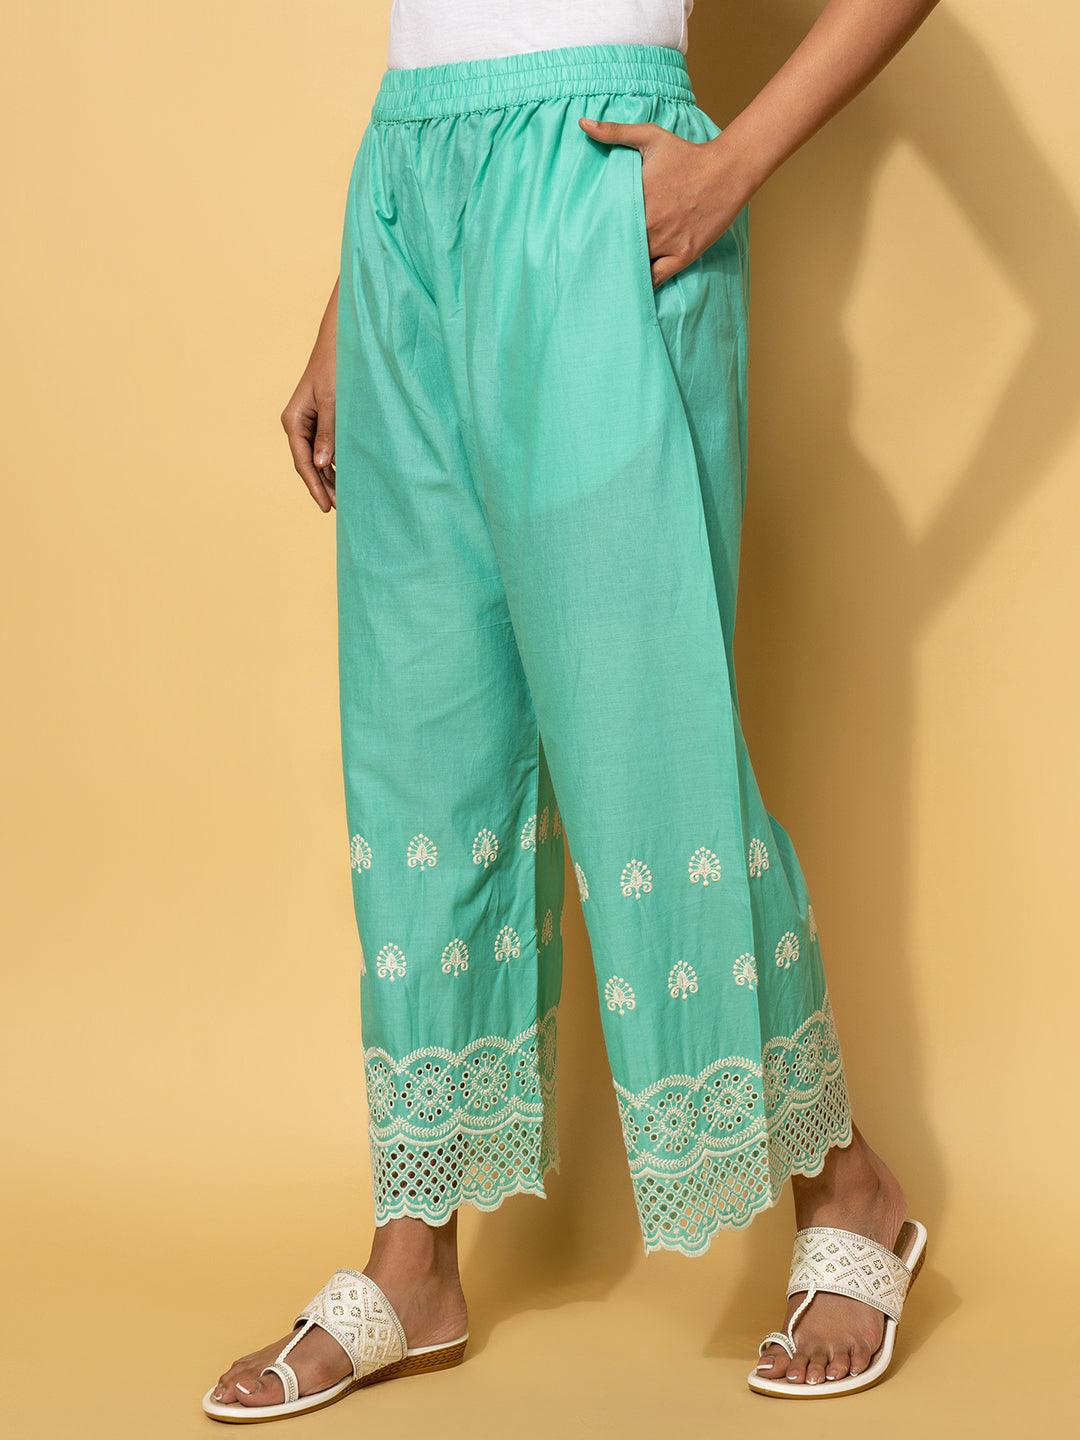 Green Embroidered Cotton Co-Ords - Libas